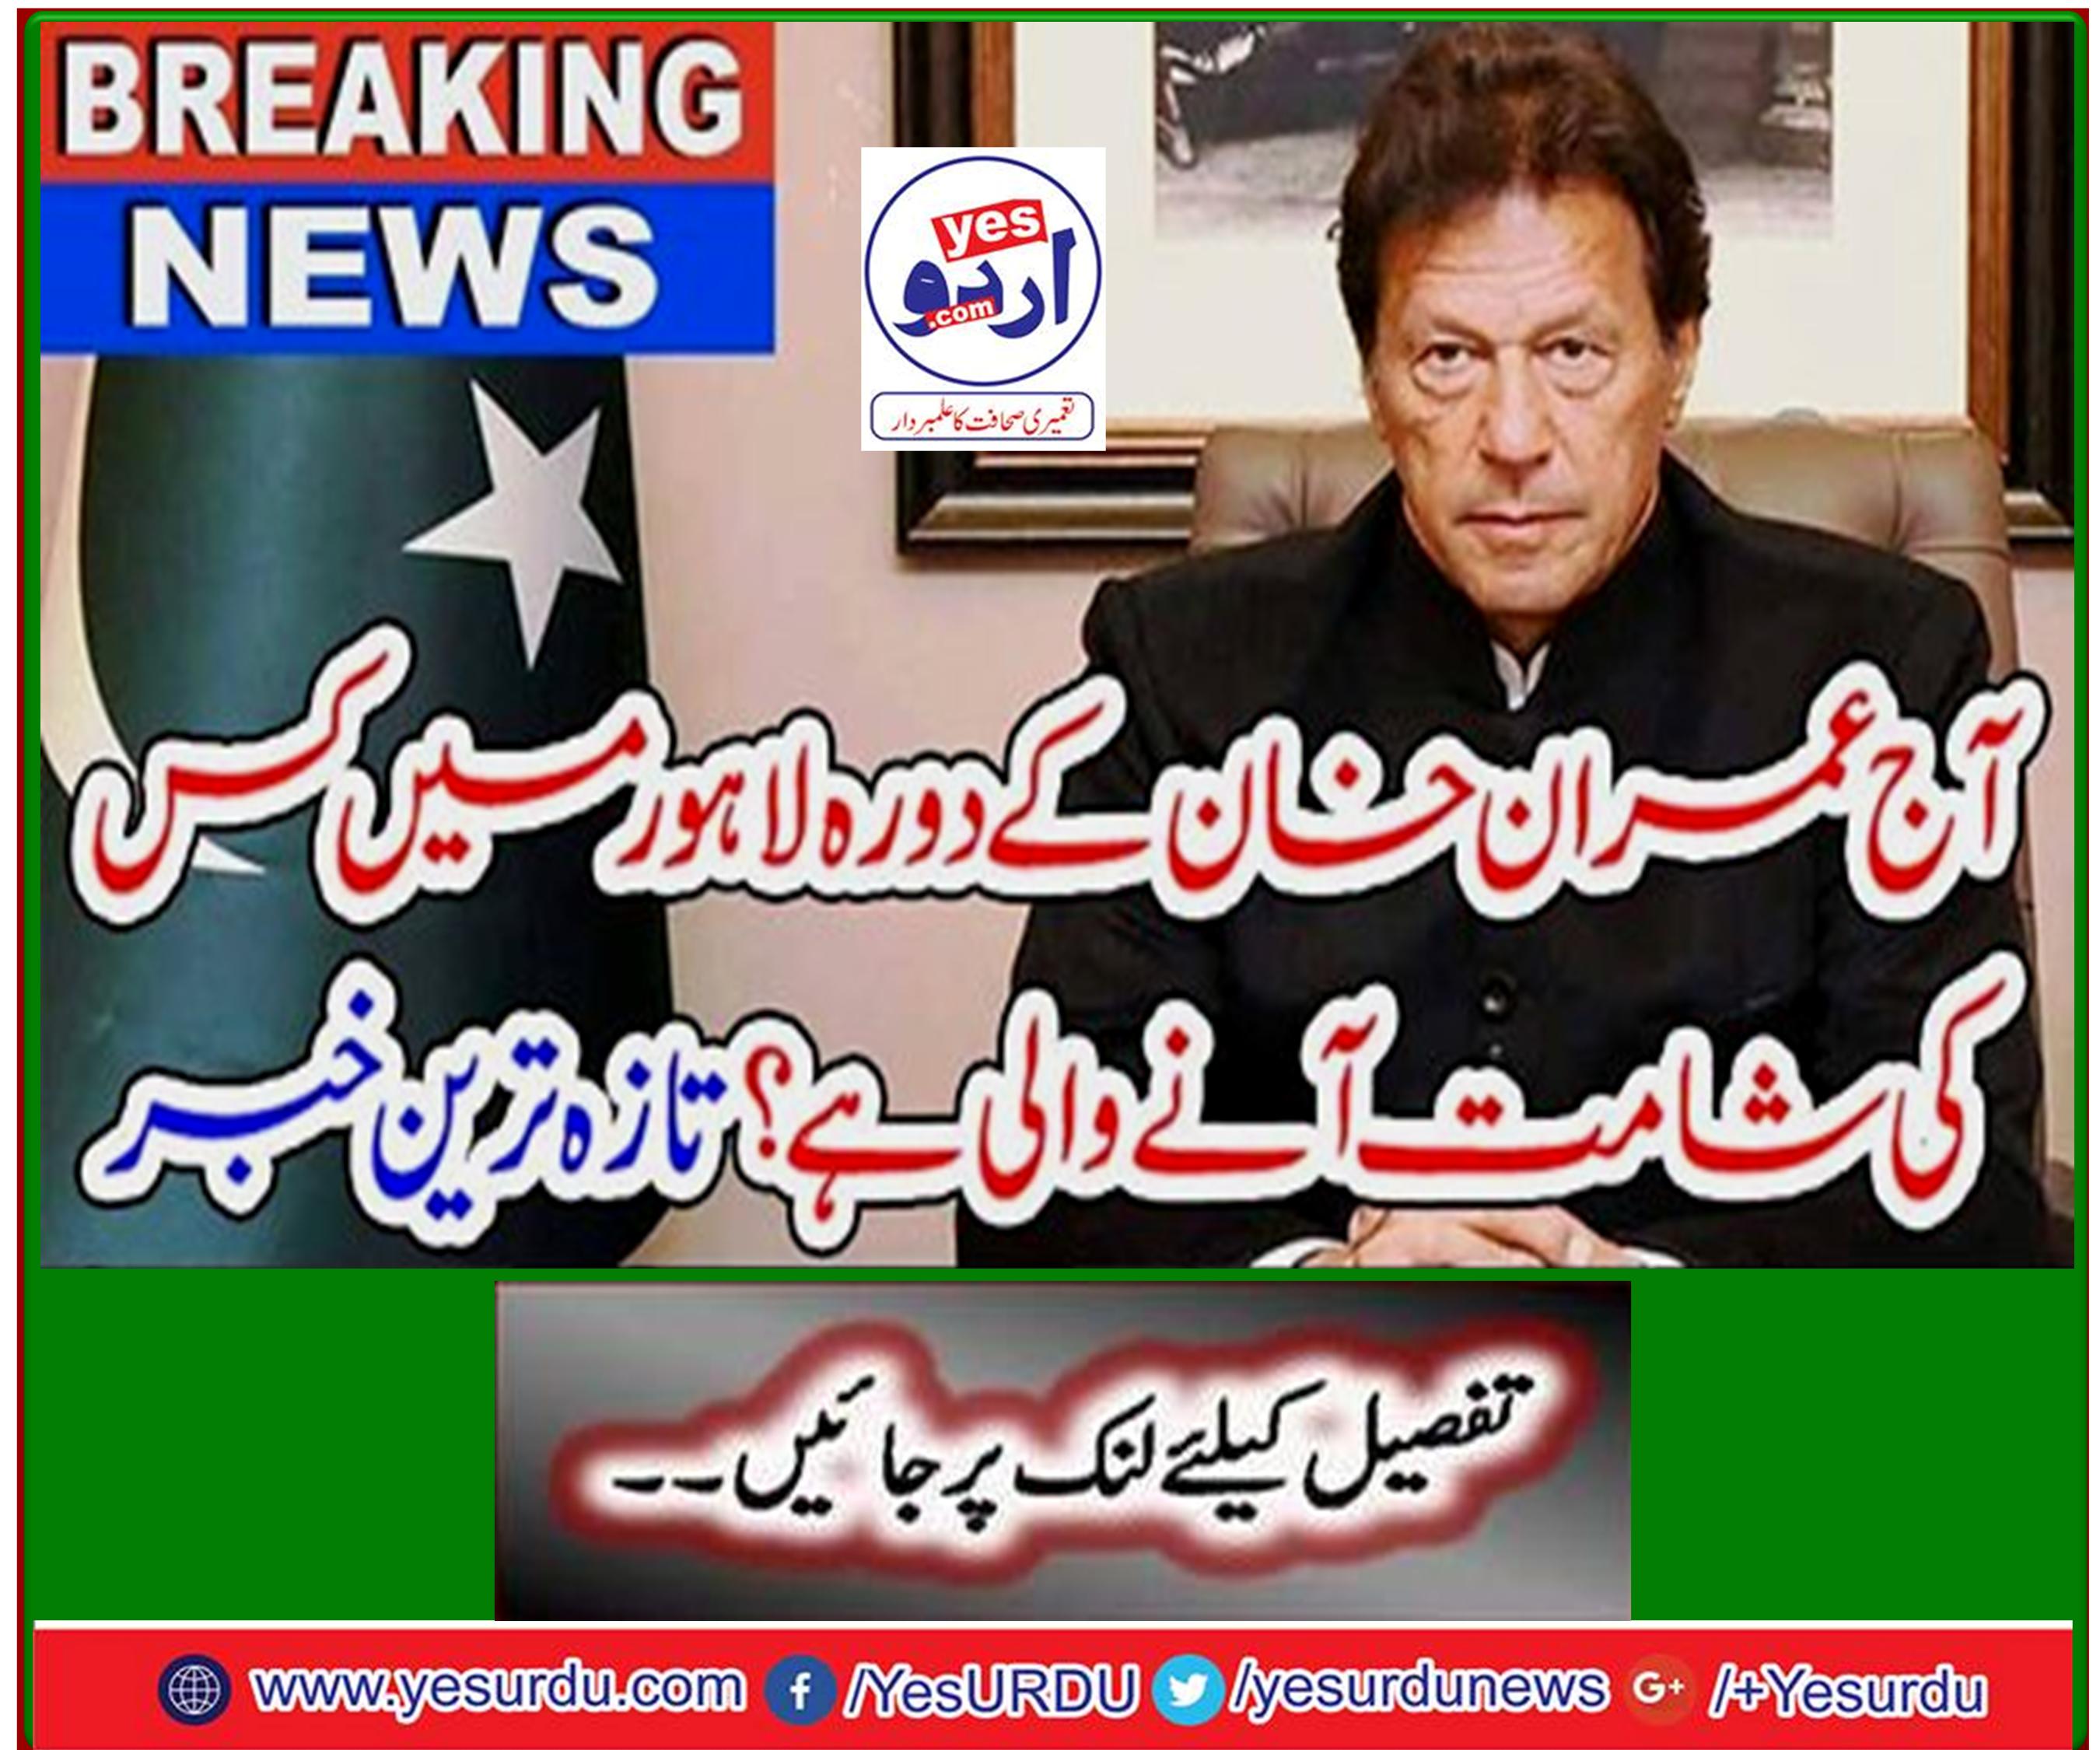 Breaking News: Who is coming to visit Imran Khan in Lahore today? Latest news